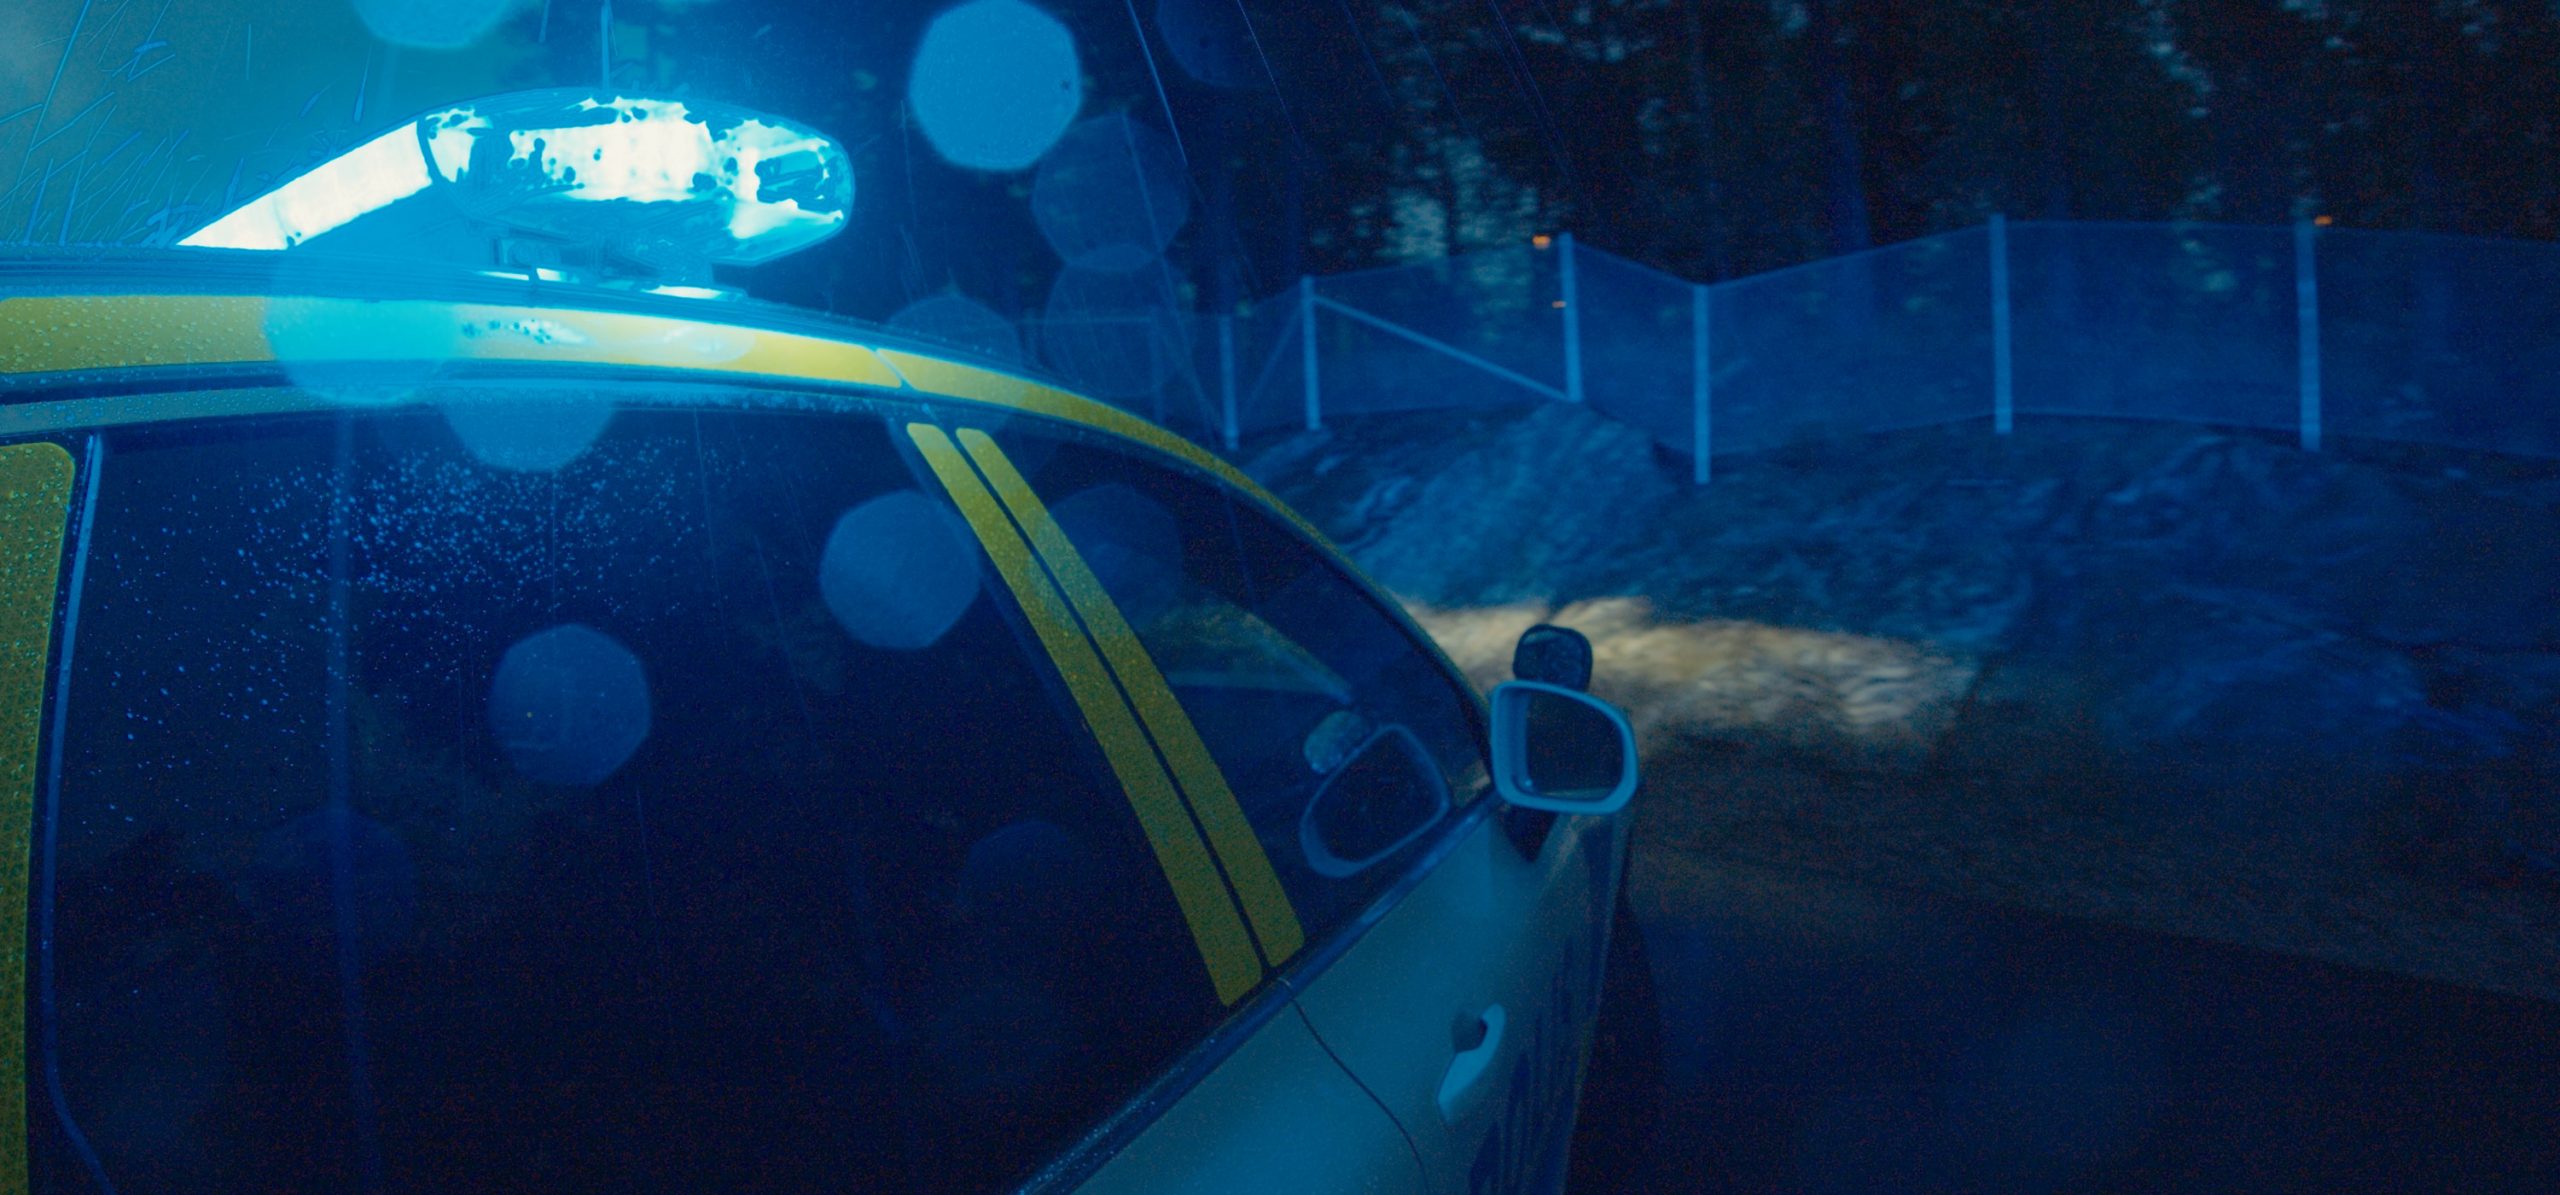 Hero Image Lightbar on Car at Night Lit Blue, Screen Glares around lightbar on top of a white vehicle with yellow graphics, wooded location behind fence in background